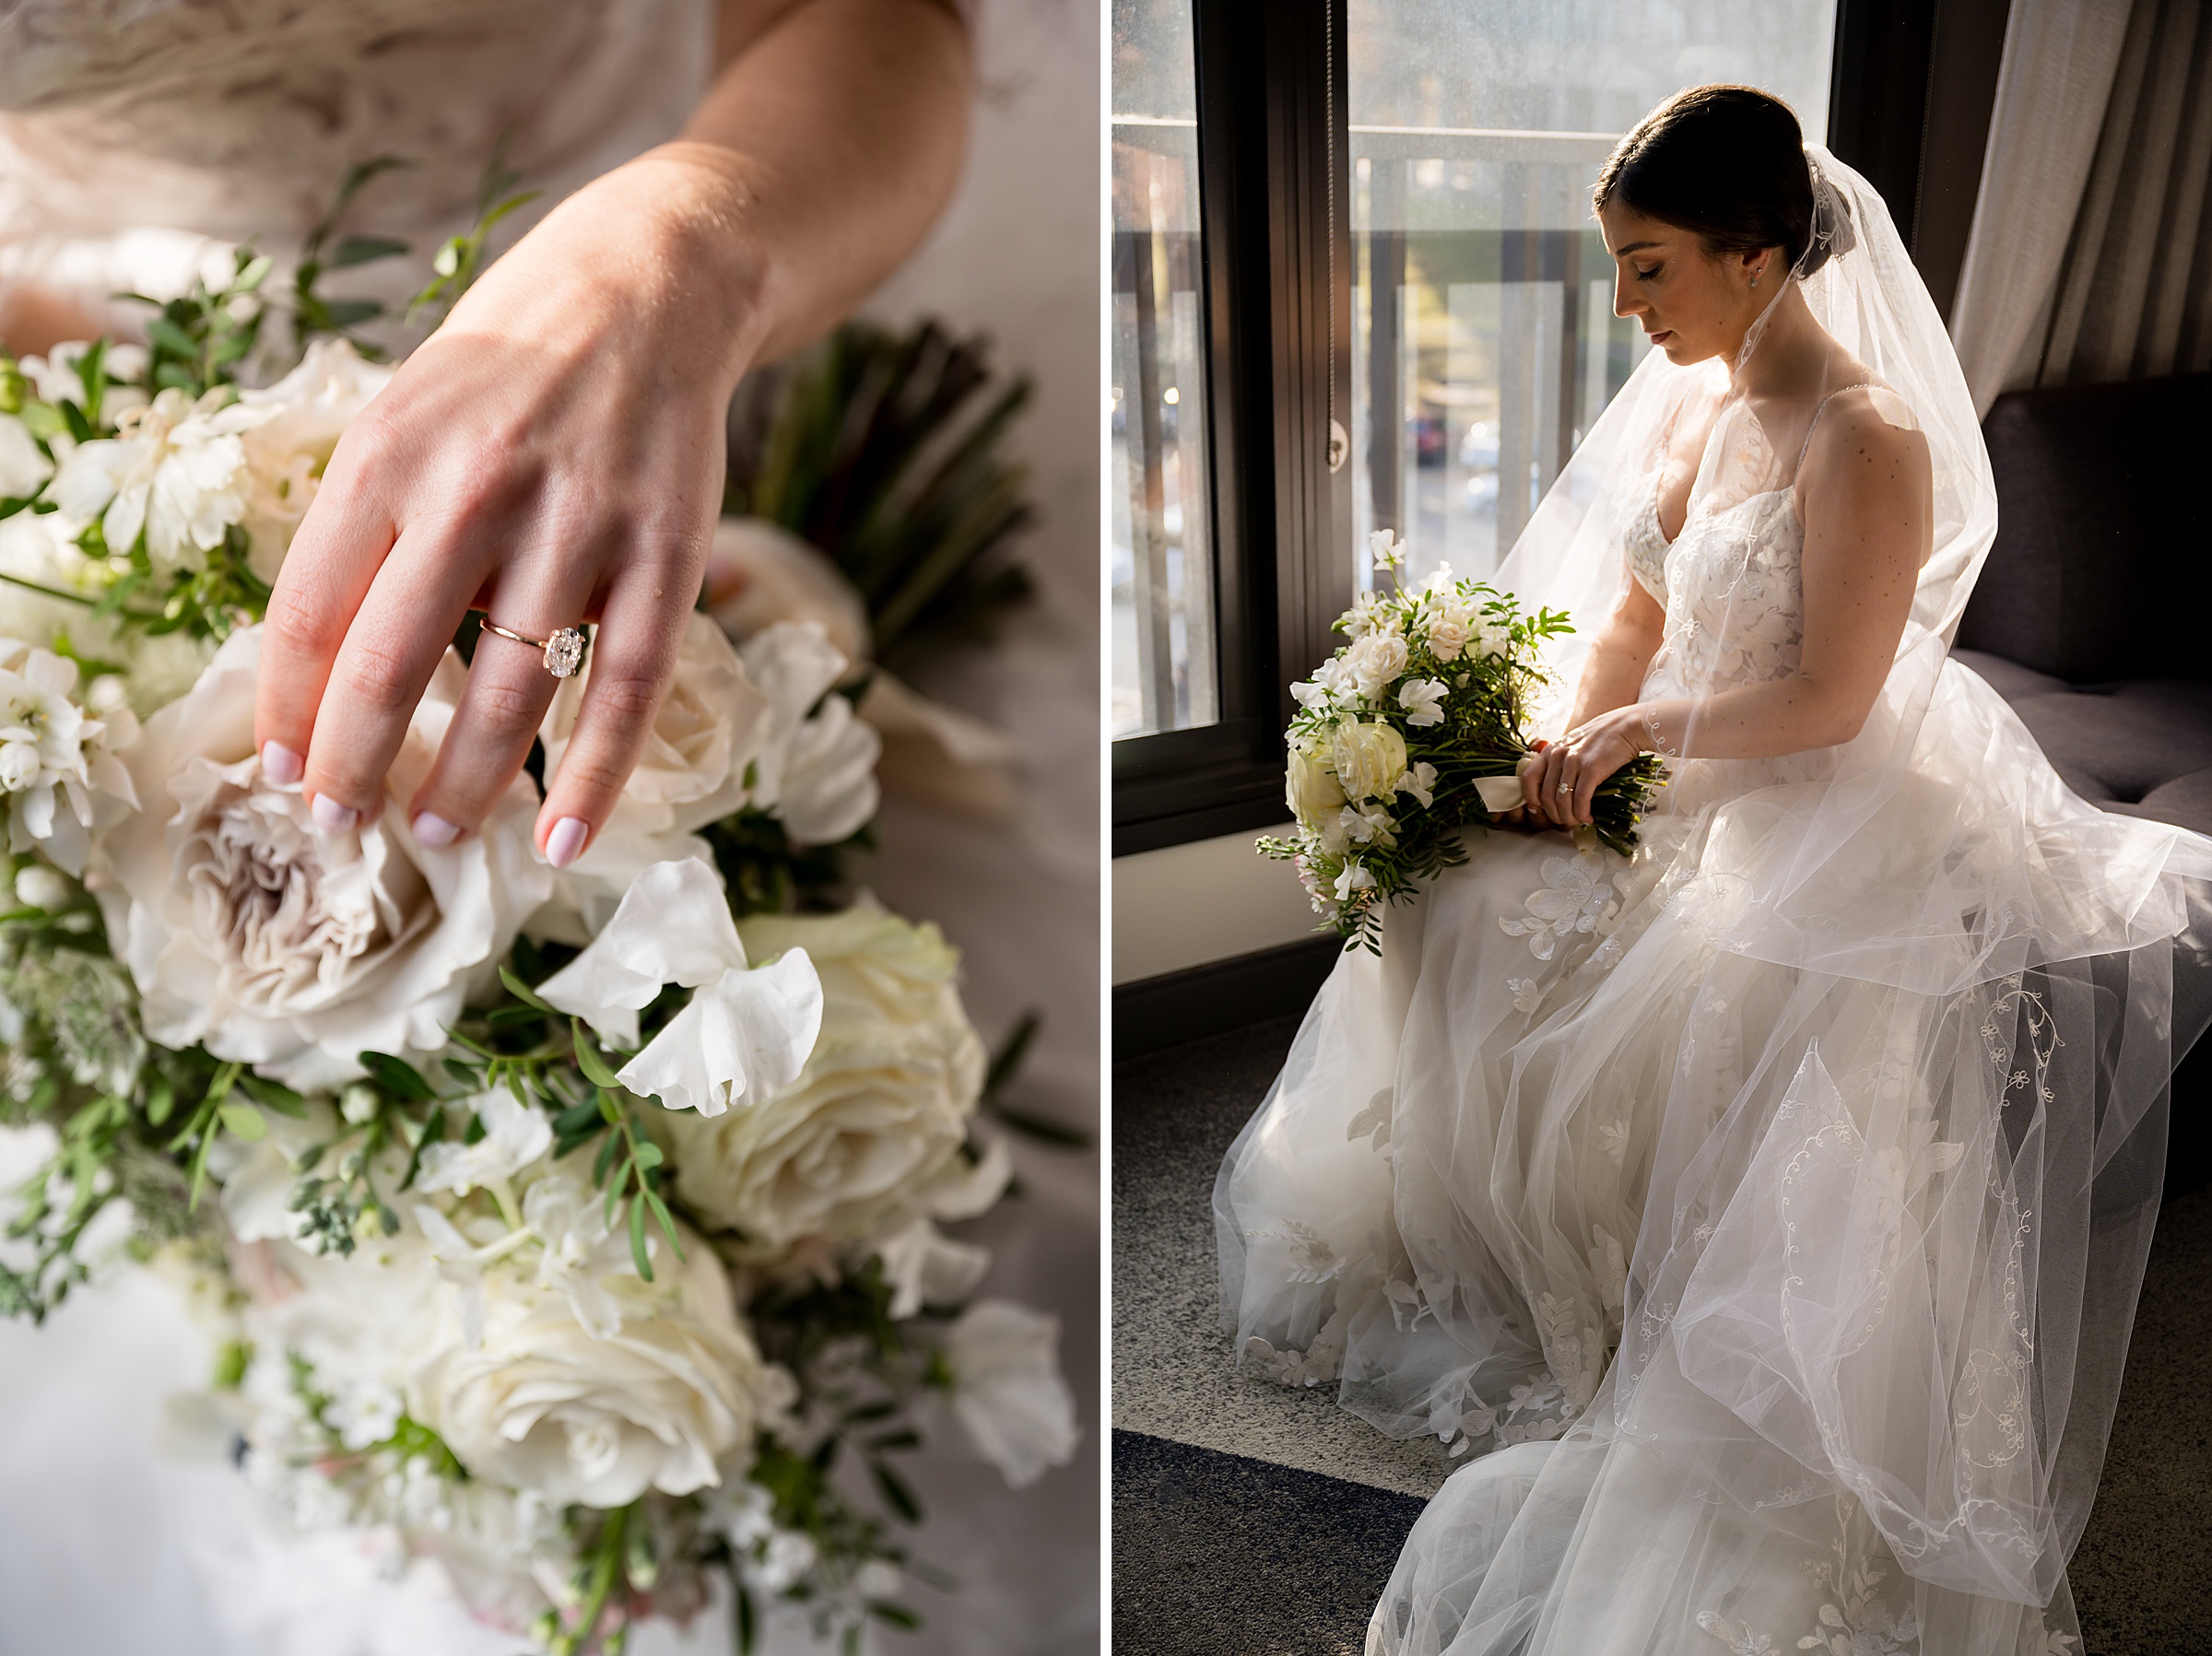 A bride in a wedding dress holding a bouquet at Lilah Events.